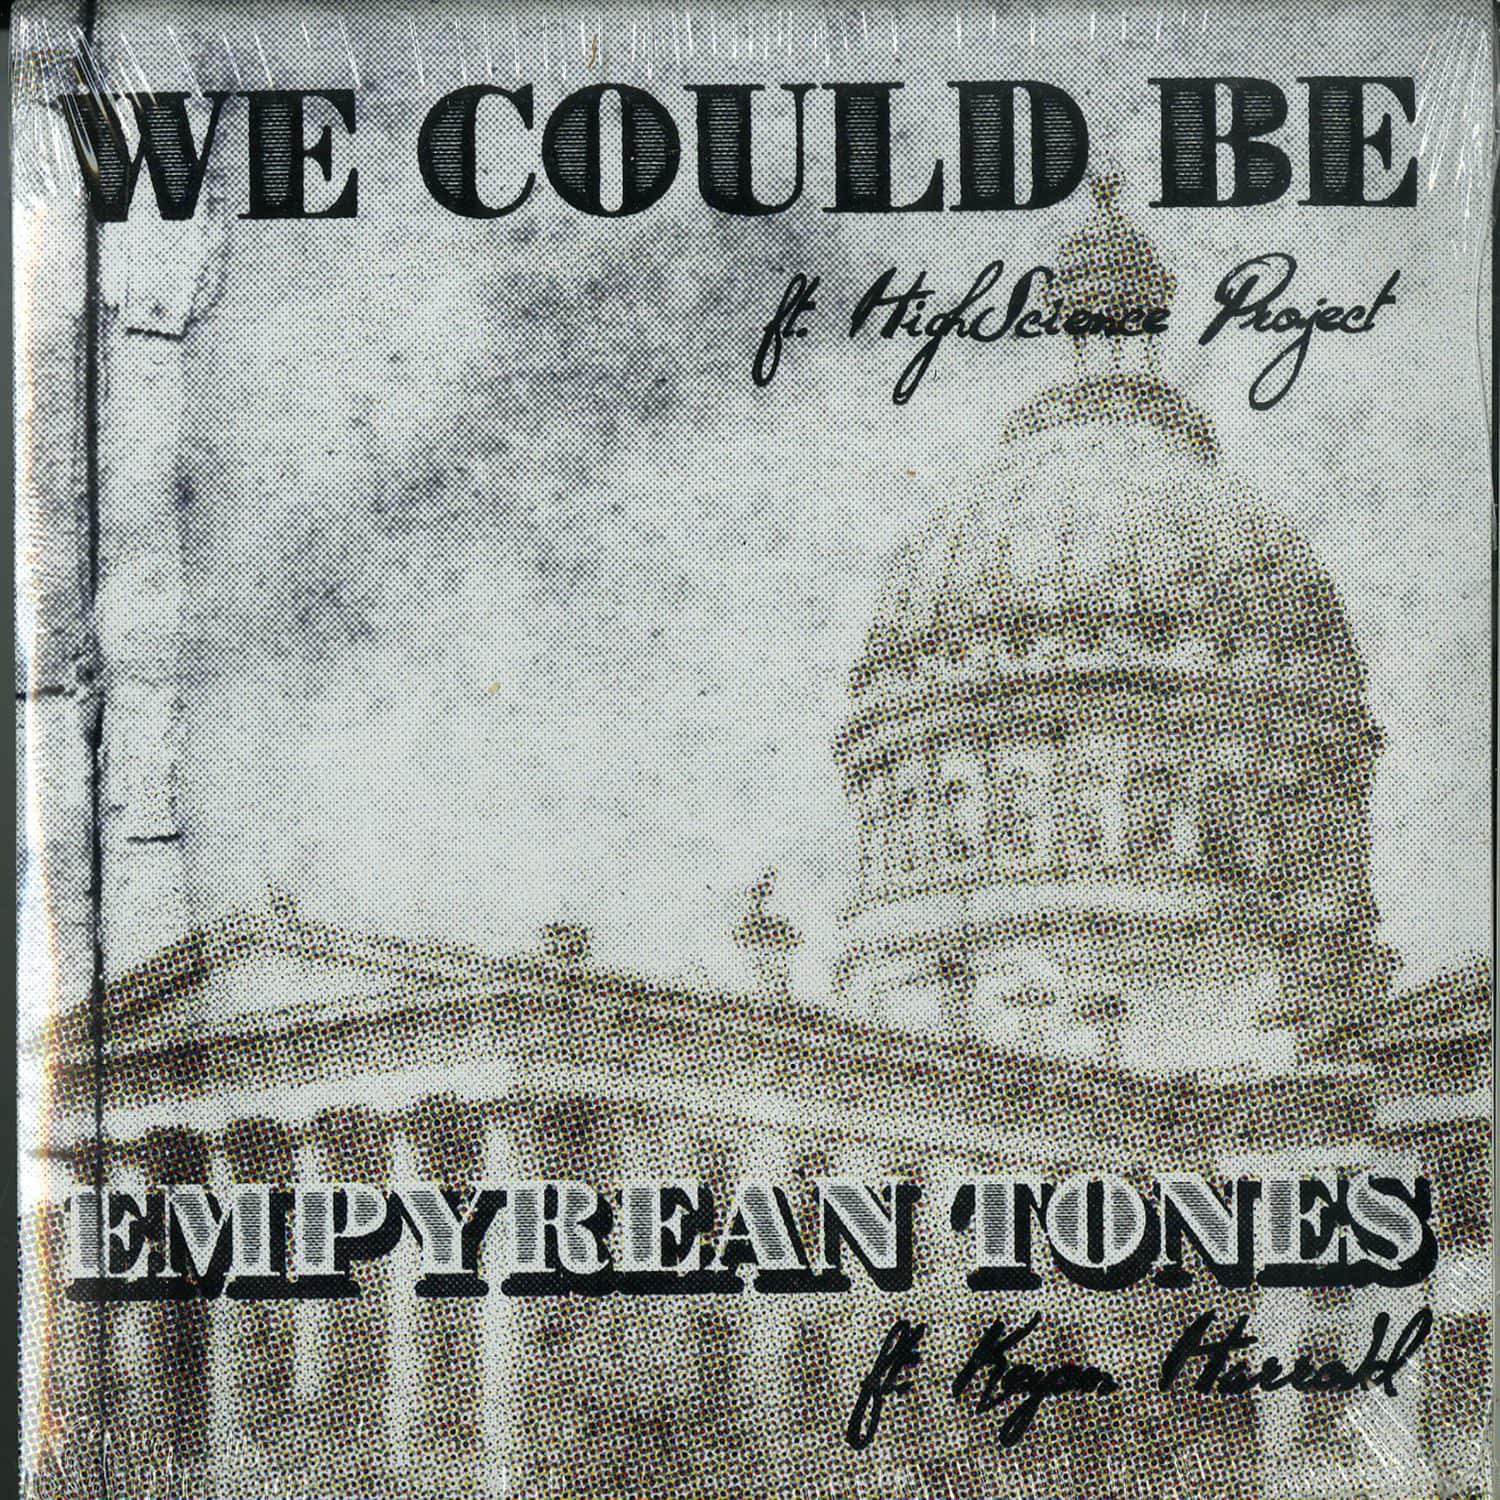 Jason Mcguiness - WE COULD BE / EMPYREAN TONES 